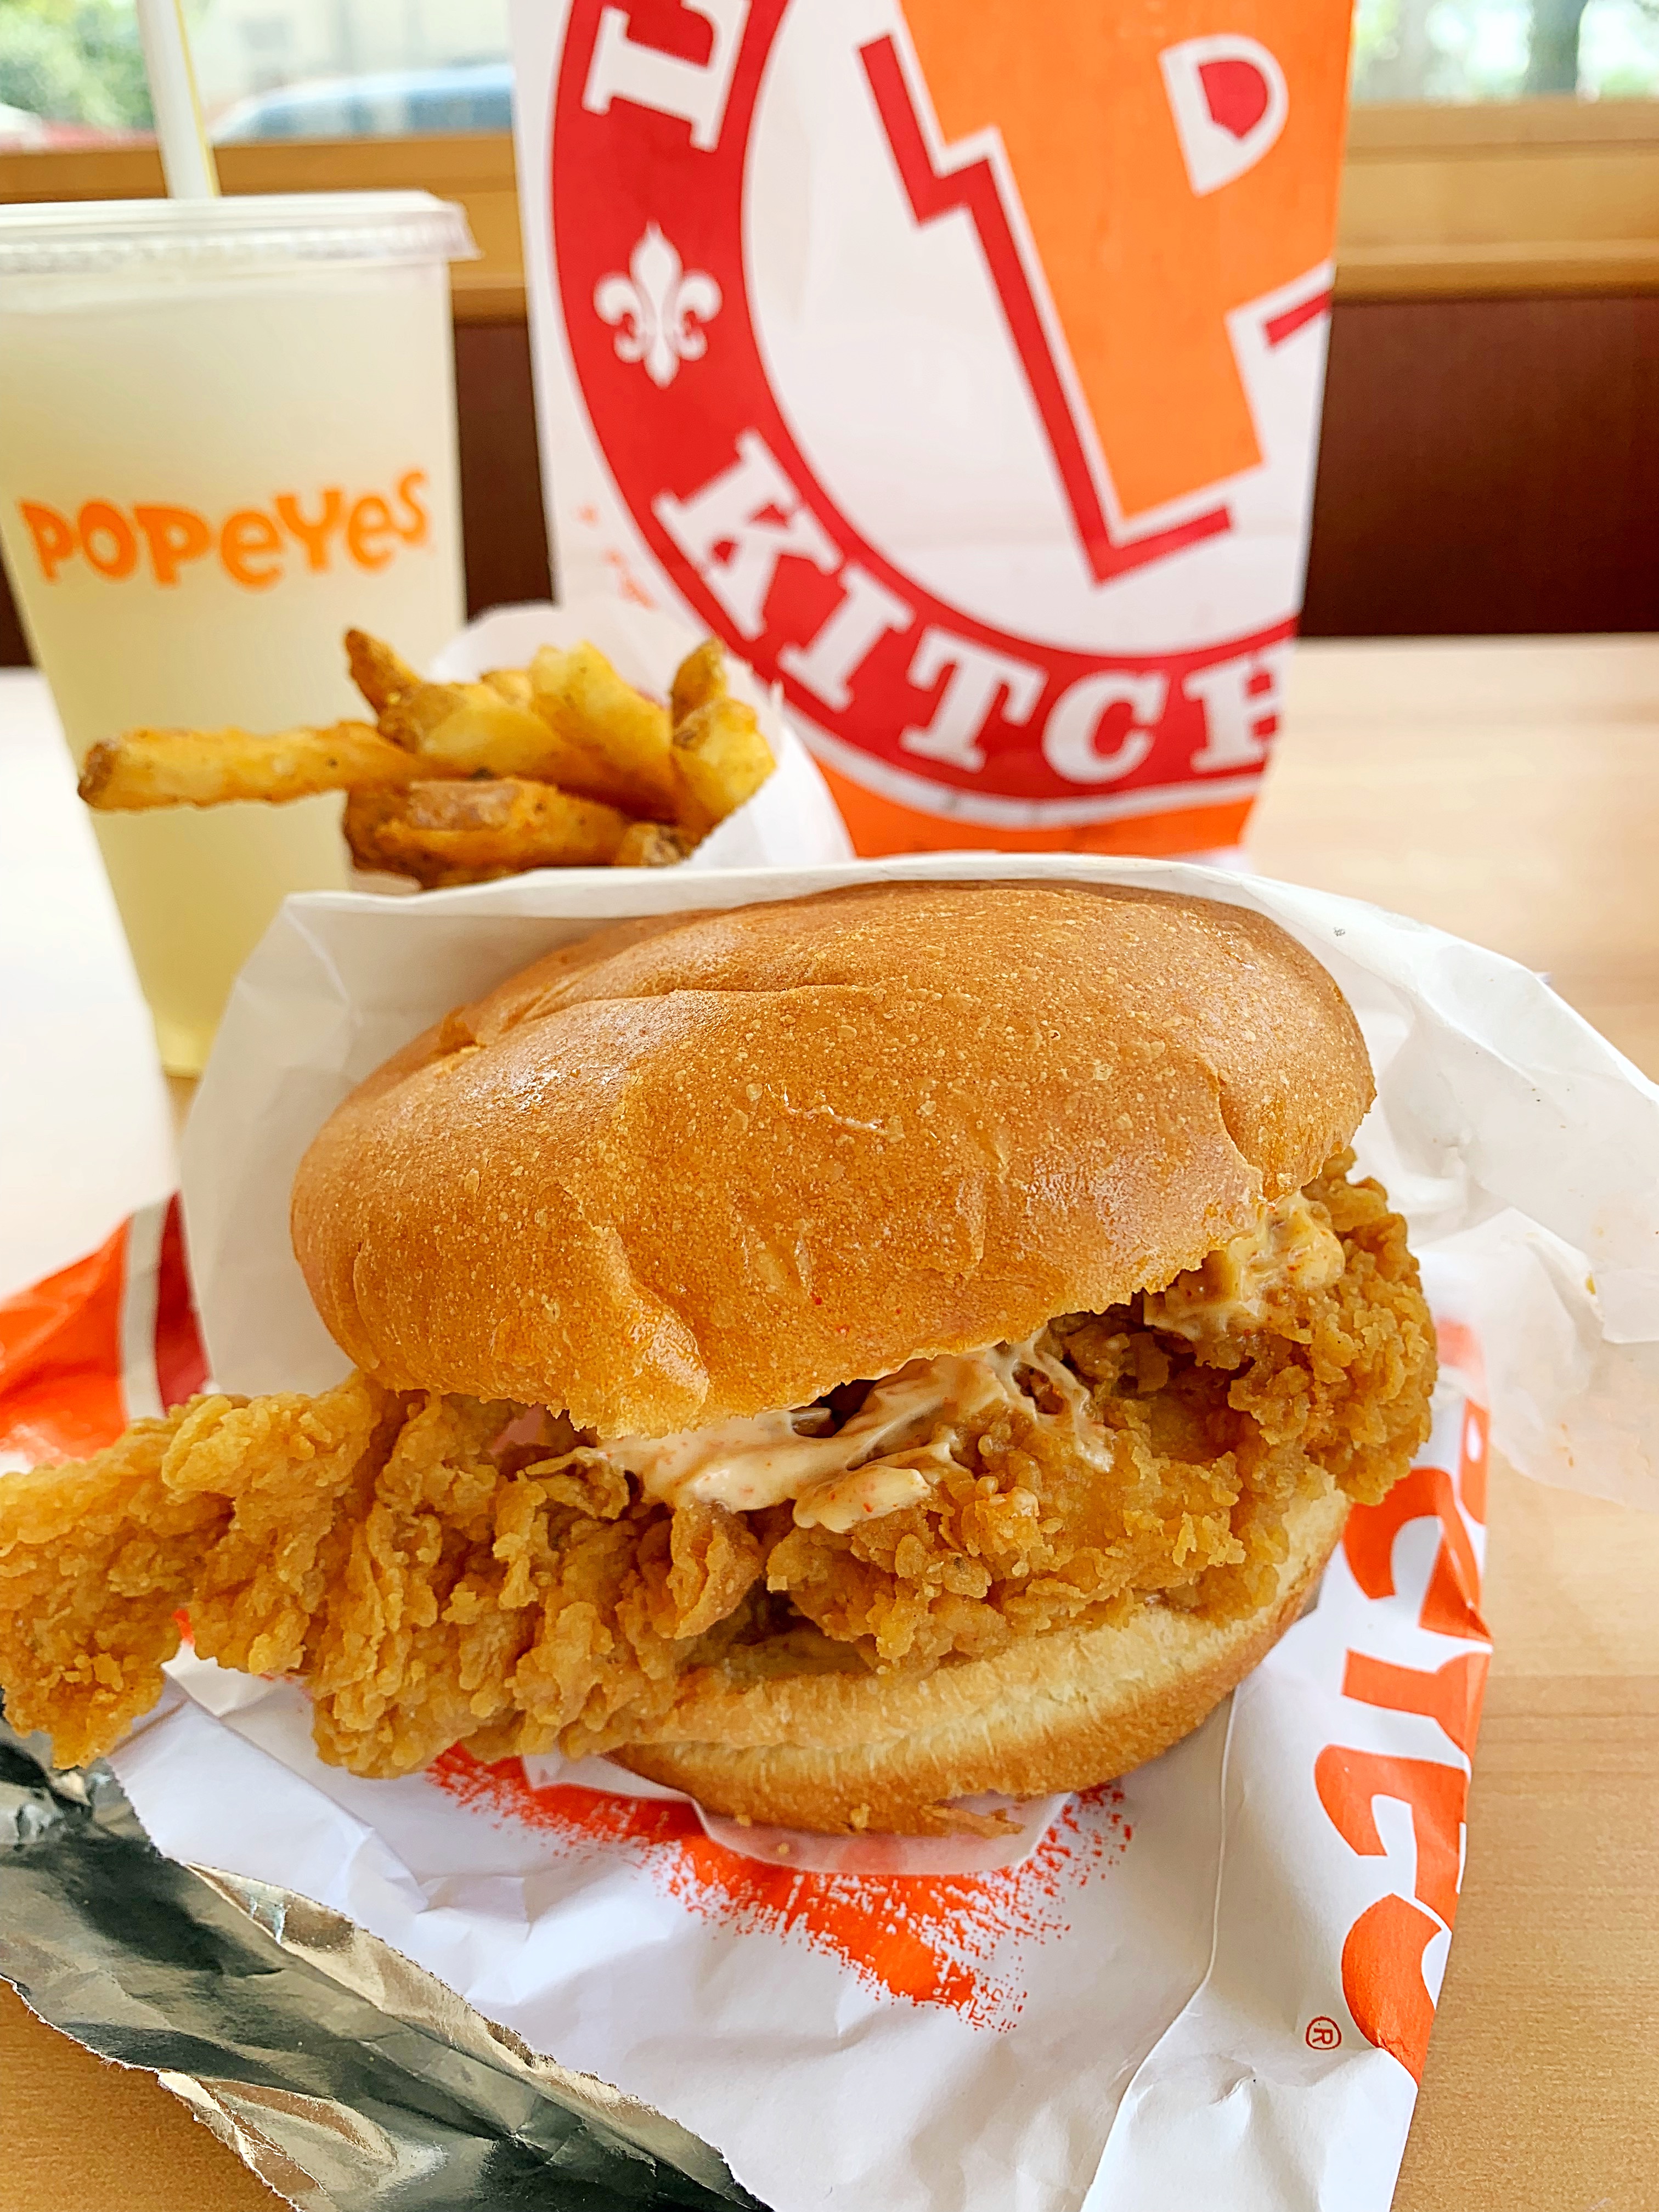 The Great Chicken Debate, Popeyes vs Chick-fil-A